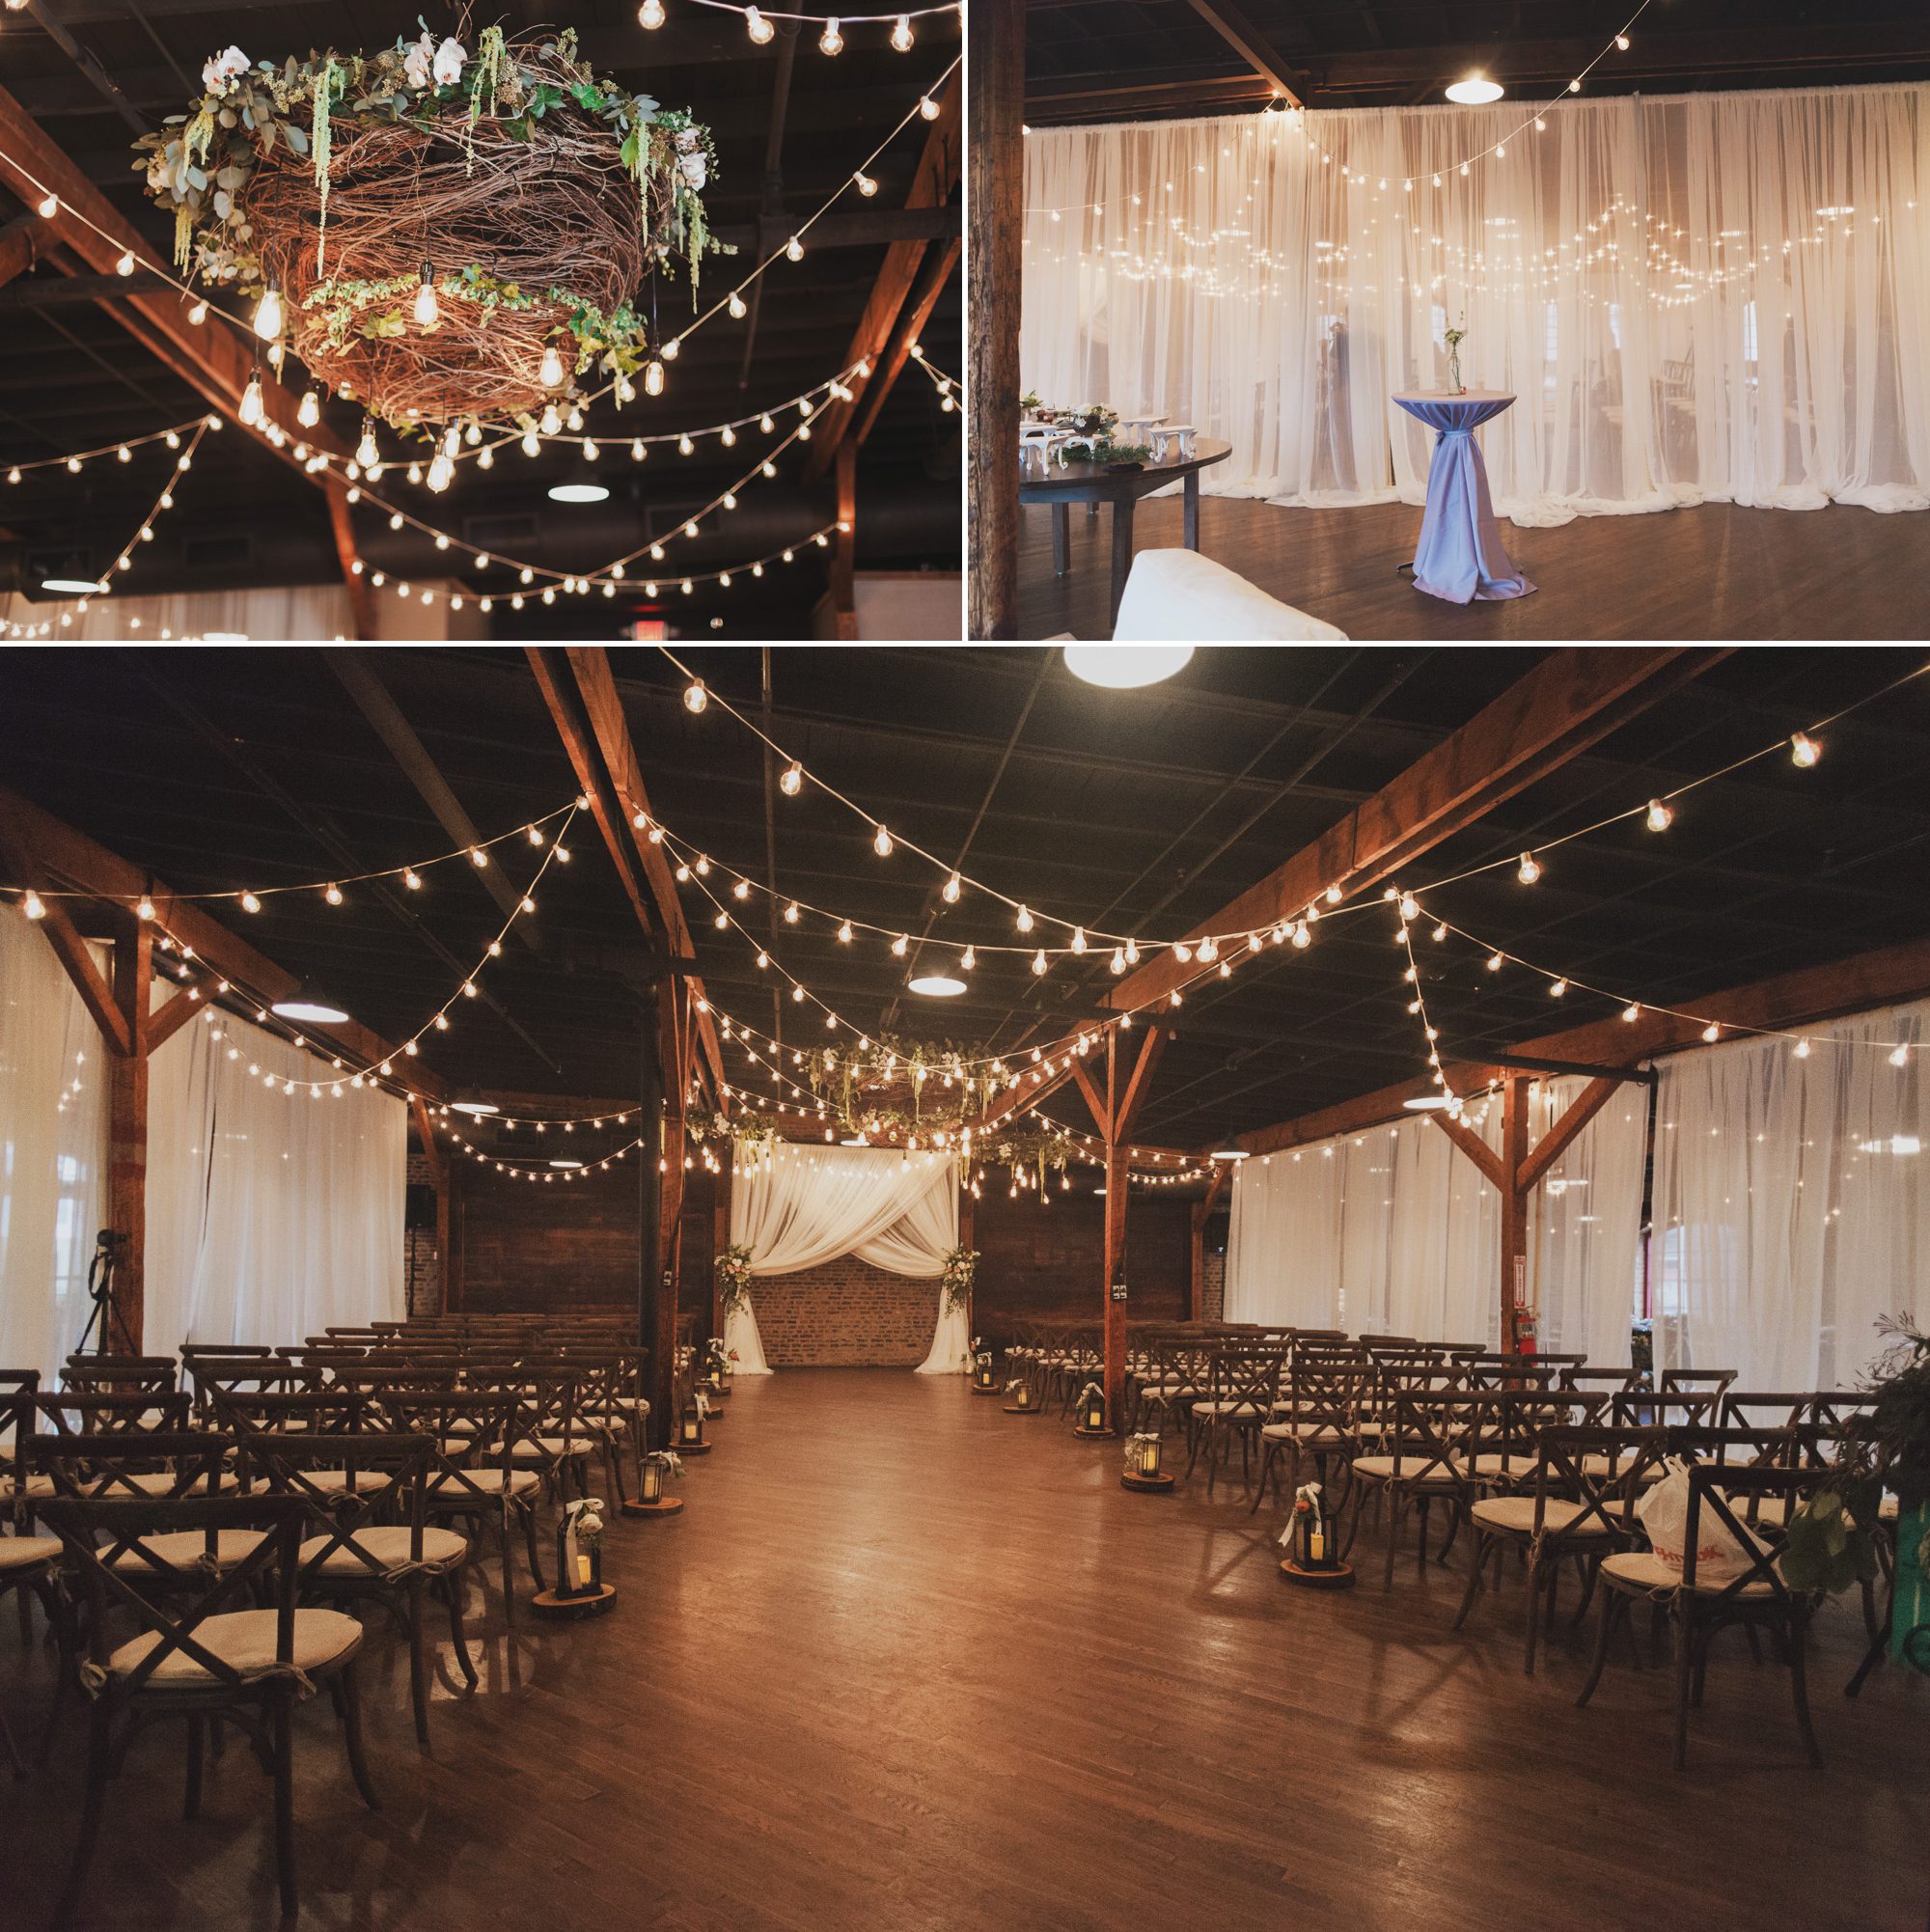 Wedding ceremony area before guests arrive  at Houston Station, Nashville TN. Photos by Krista Lee Photography.